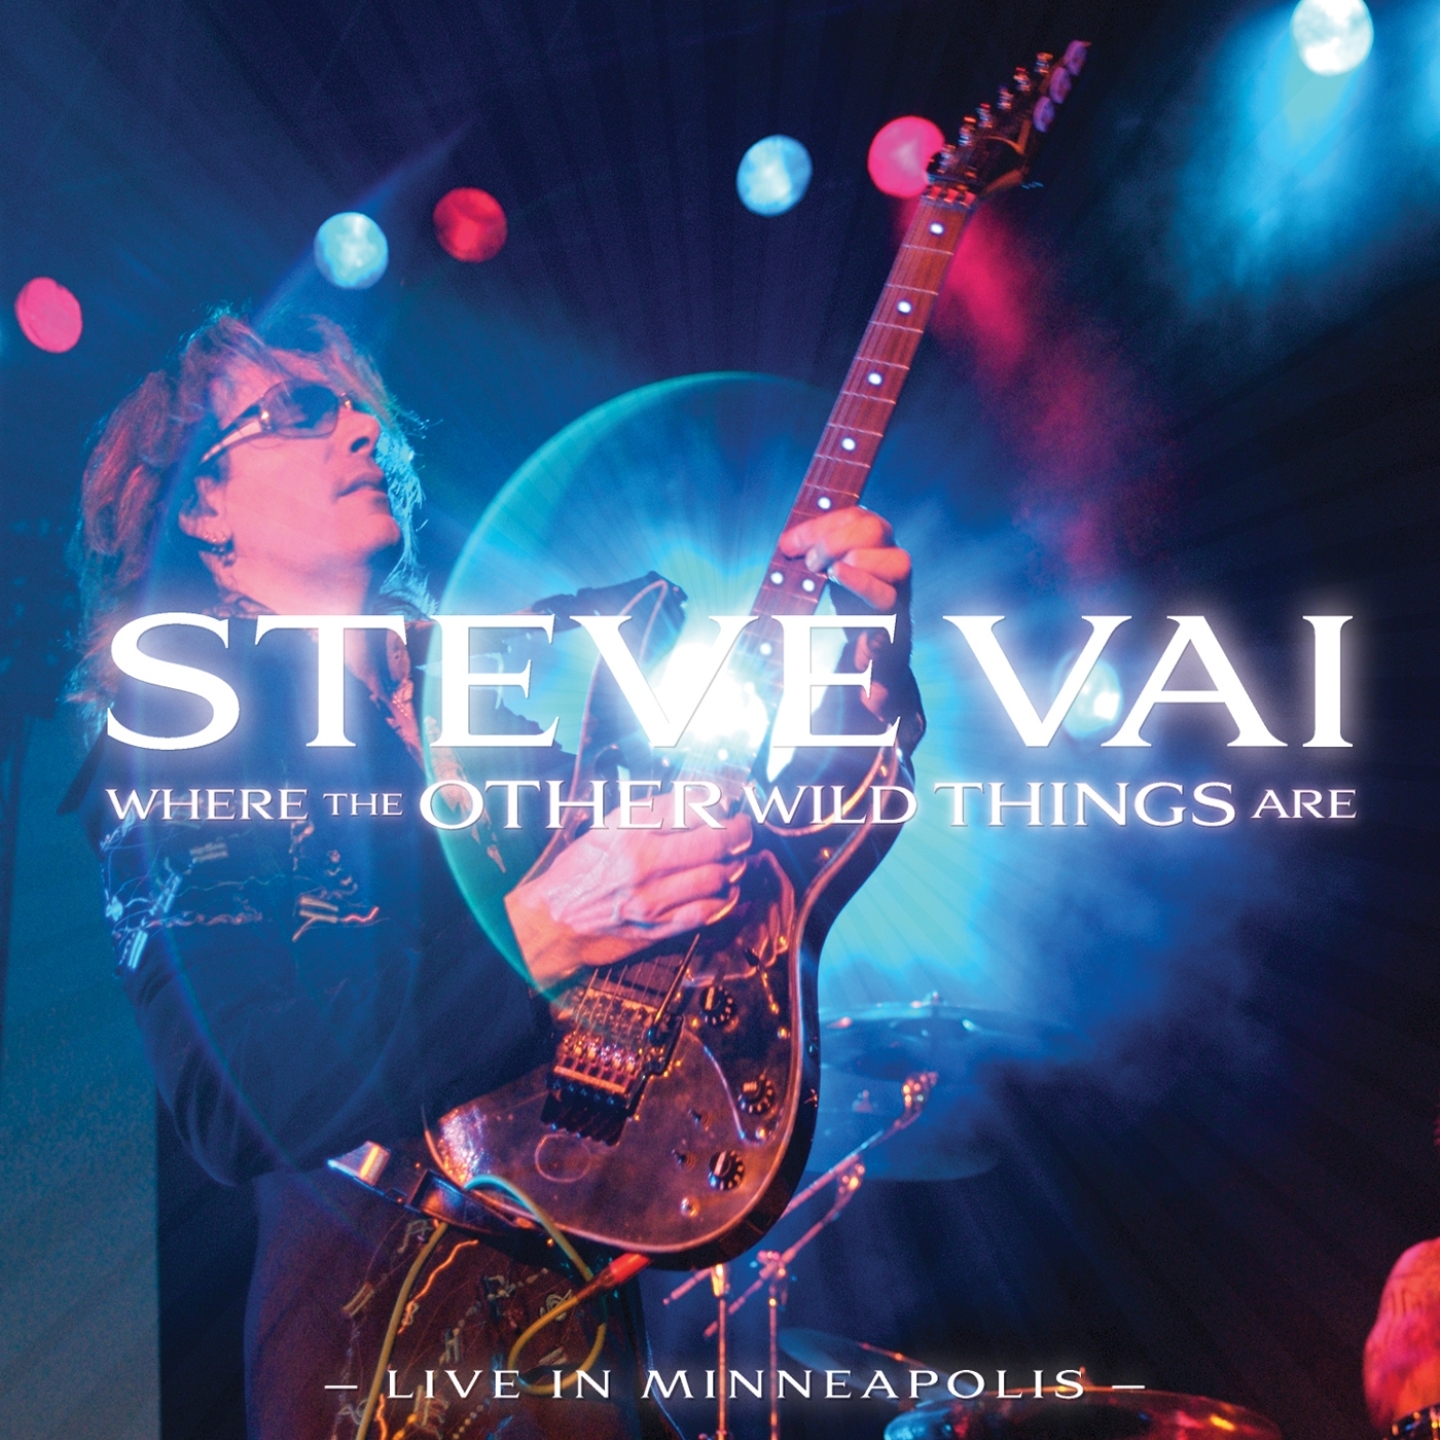 stevevai.it - Steve Vai - Where the other wild things are